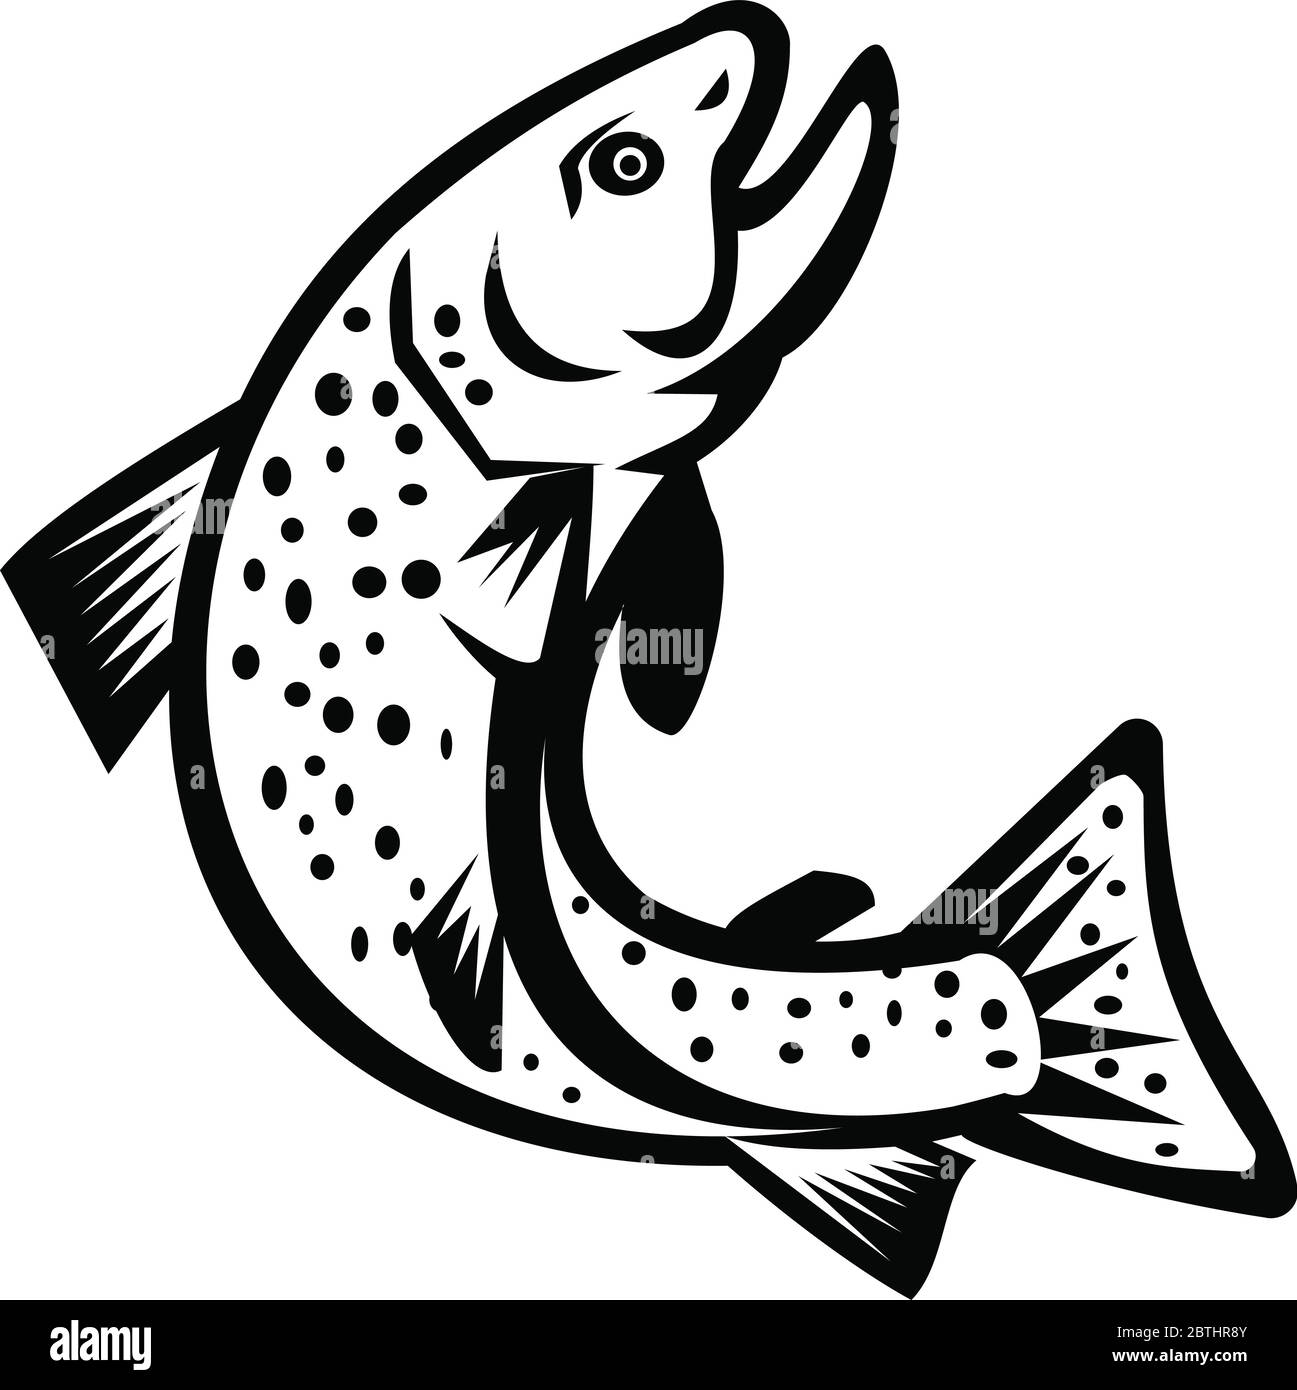 Illustration of a brook trout or Brook char jumping up viewed from